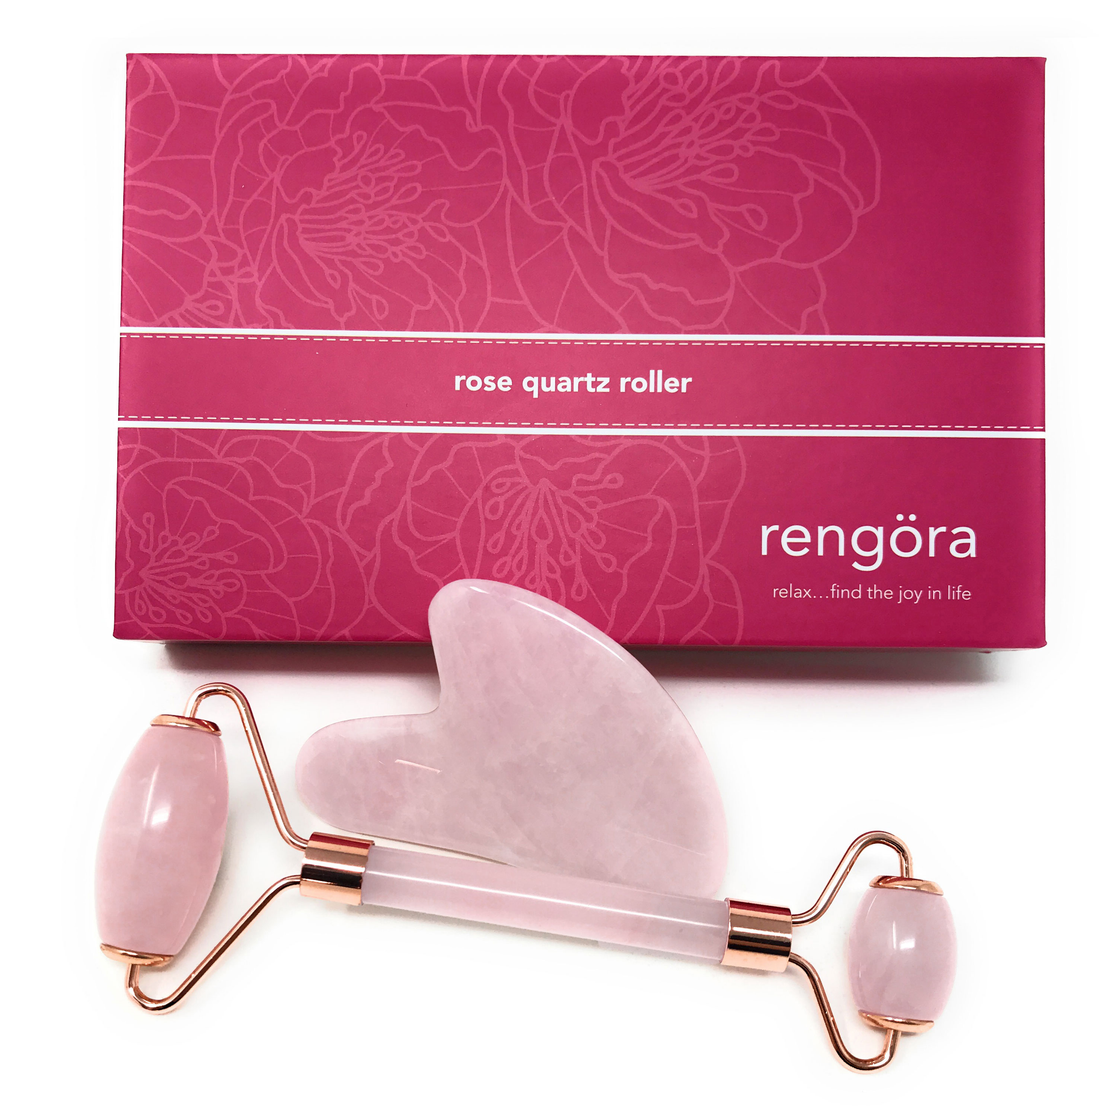 rengora rose quartz roller with a pink packaging situated in the background, set against a white backdrop